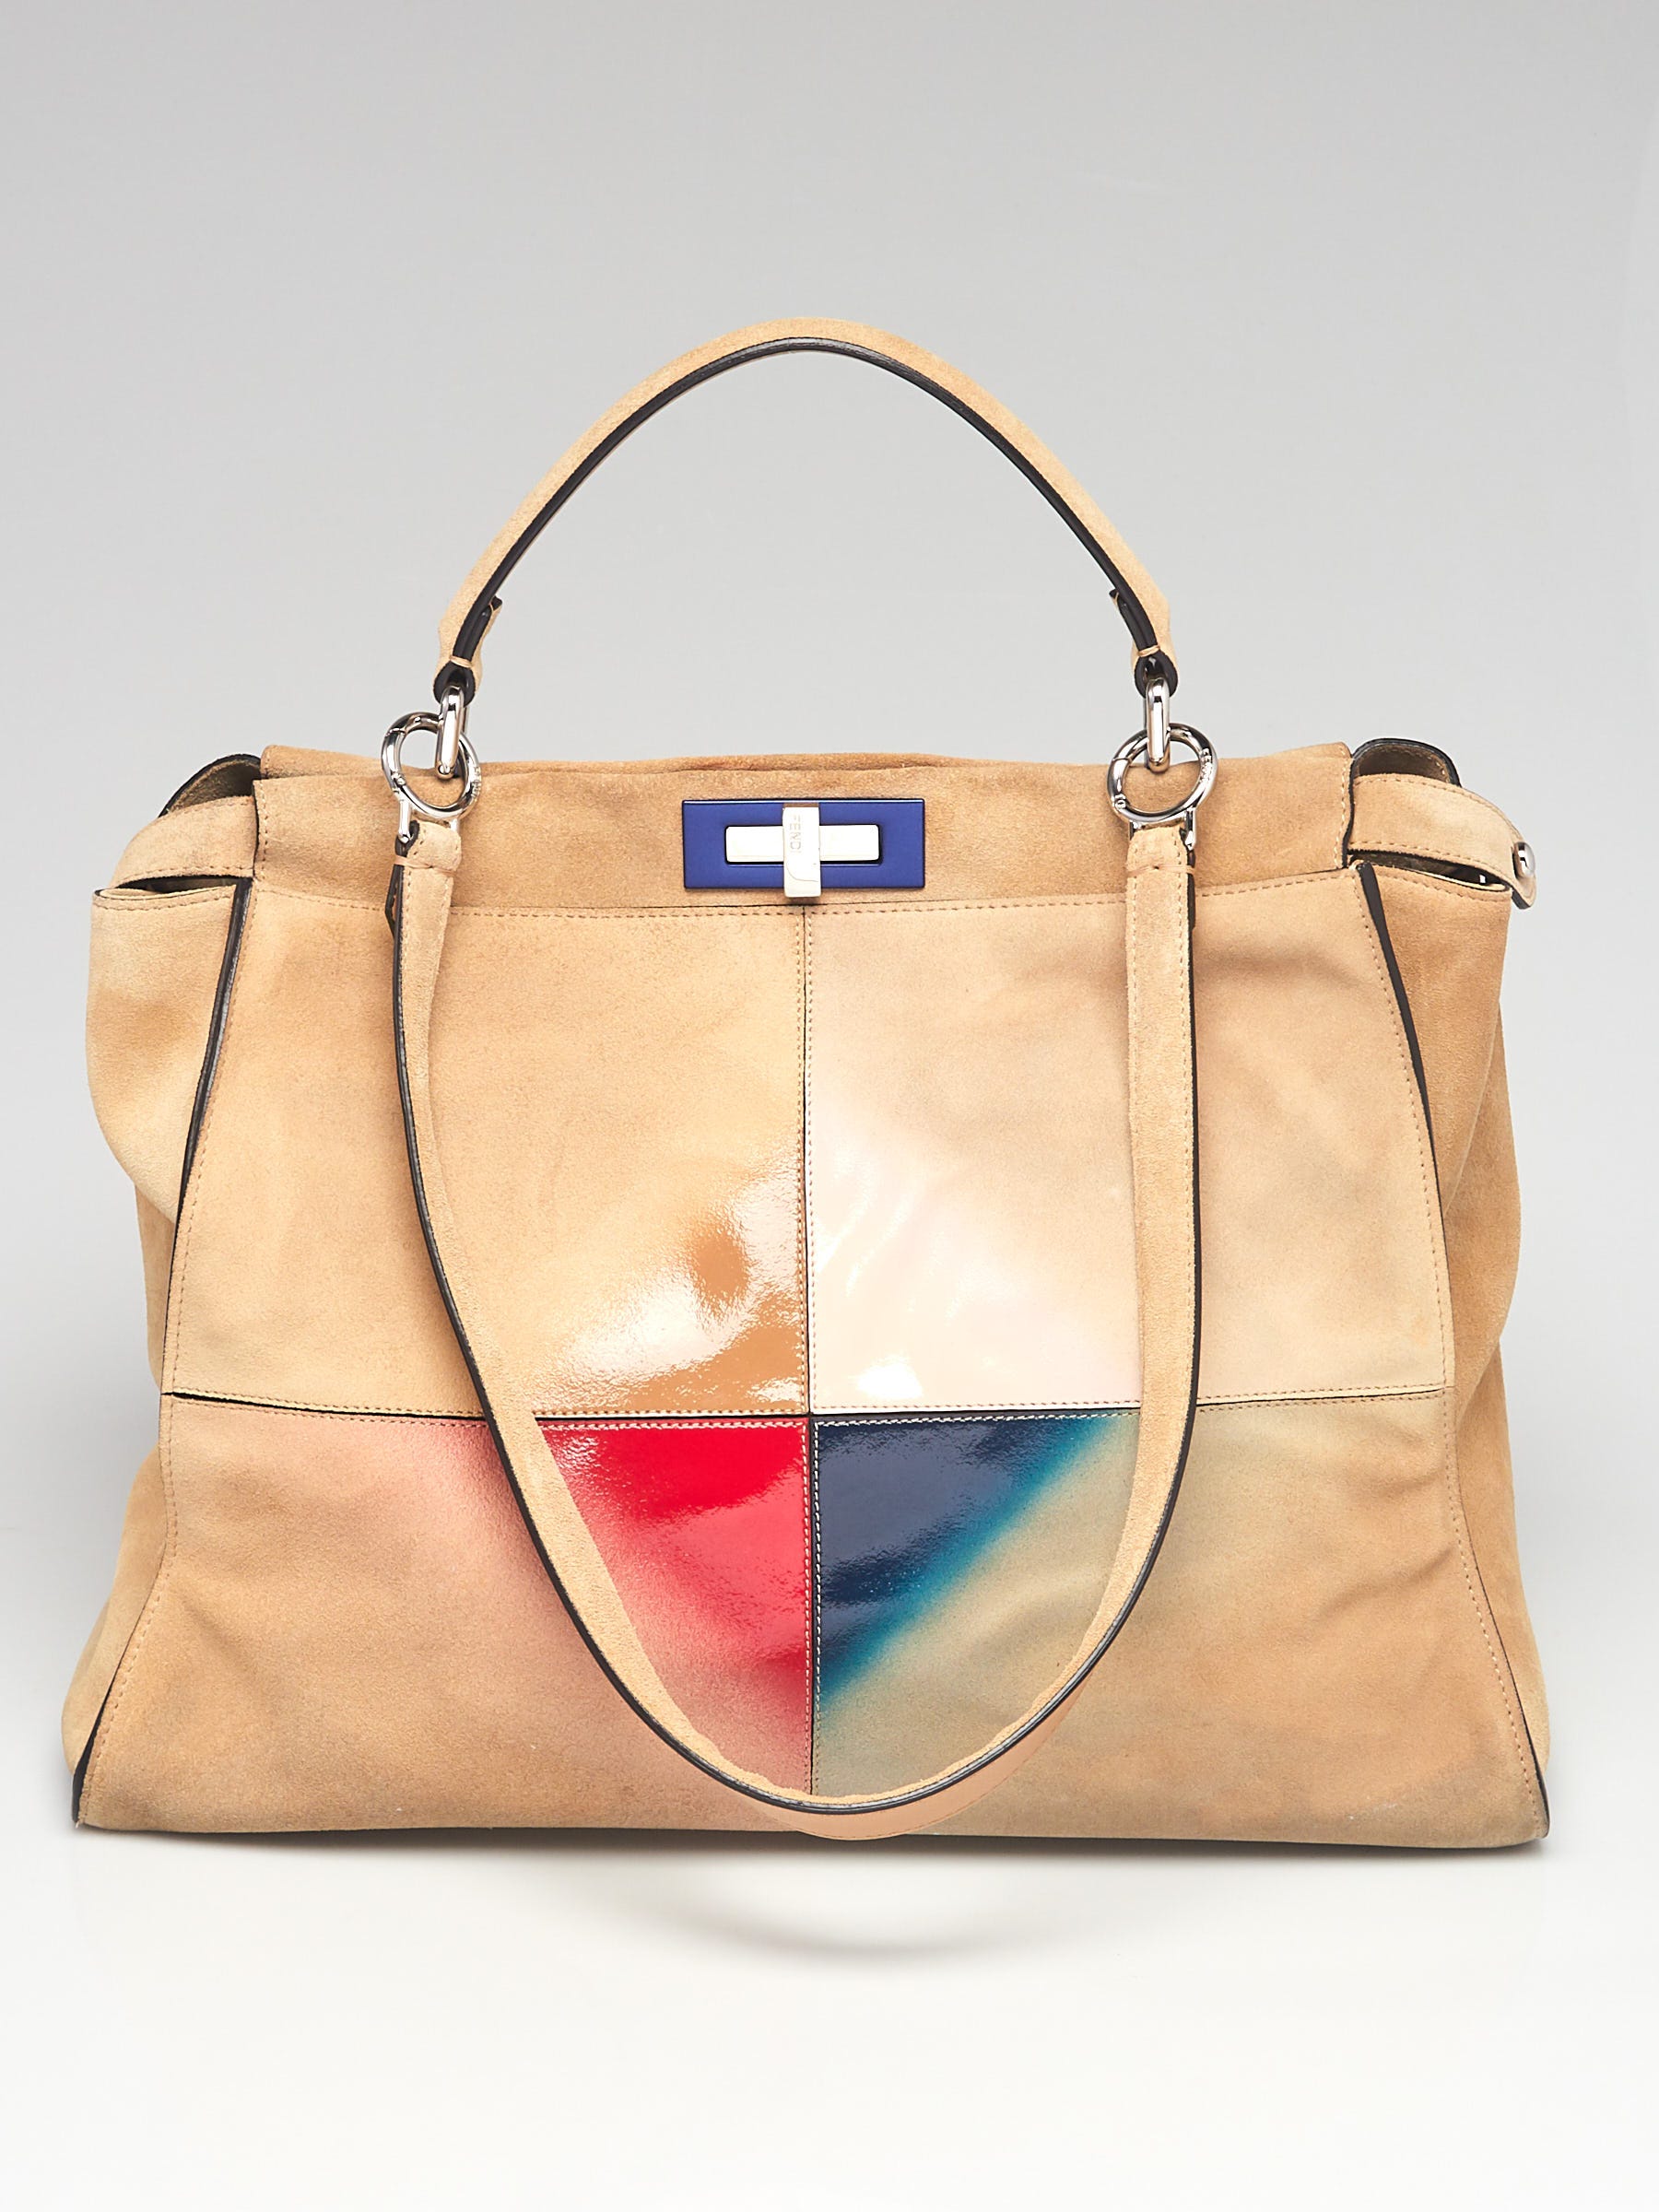 The Hadids Present a Unified Front with New Spring 2018 Bags from